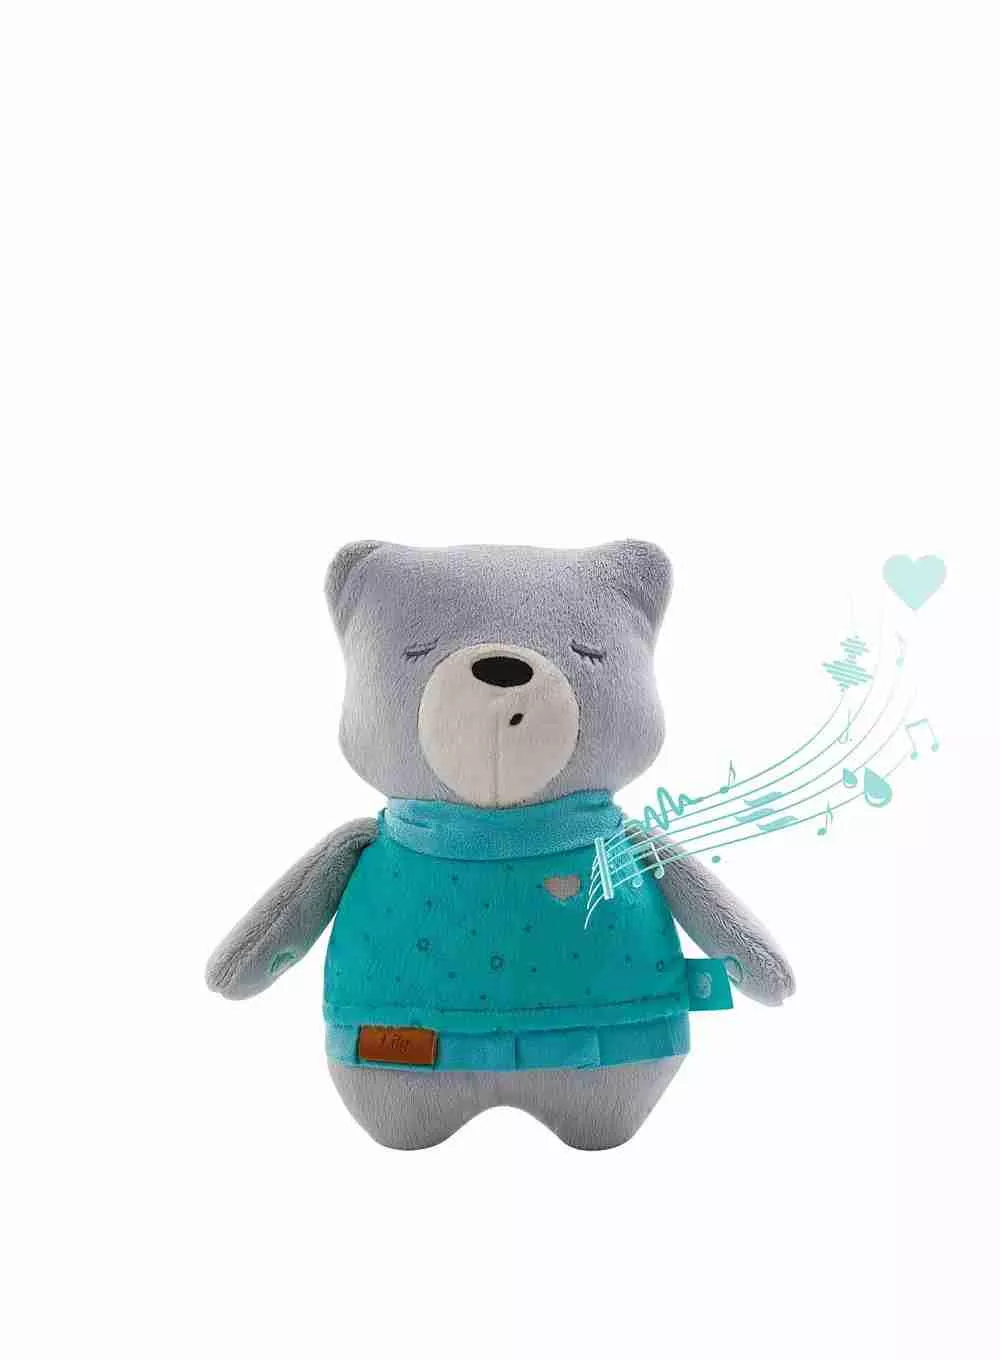 🌟 Smart Bear MyHummy Teddy Bear White Noise Soother Plush Toy with Cry  Sensor🌟